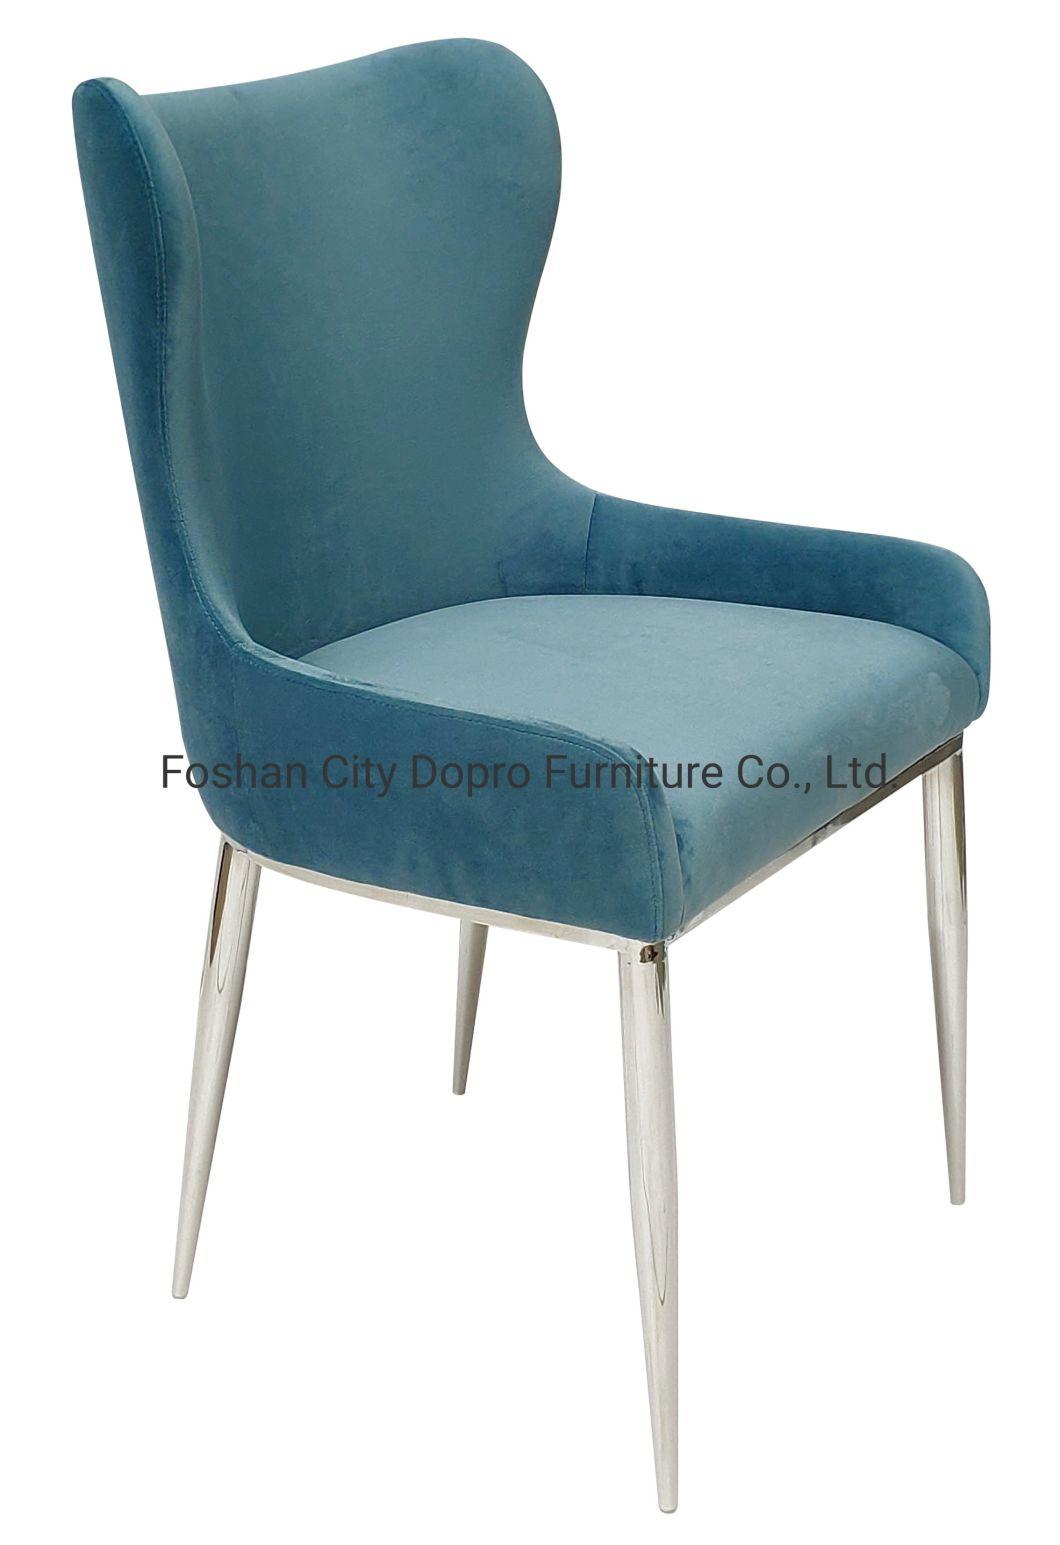 2021 New Fashion Hotsale Product Metal Dining Chair Dopro Furniture